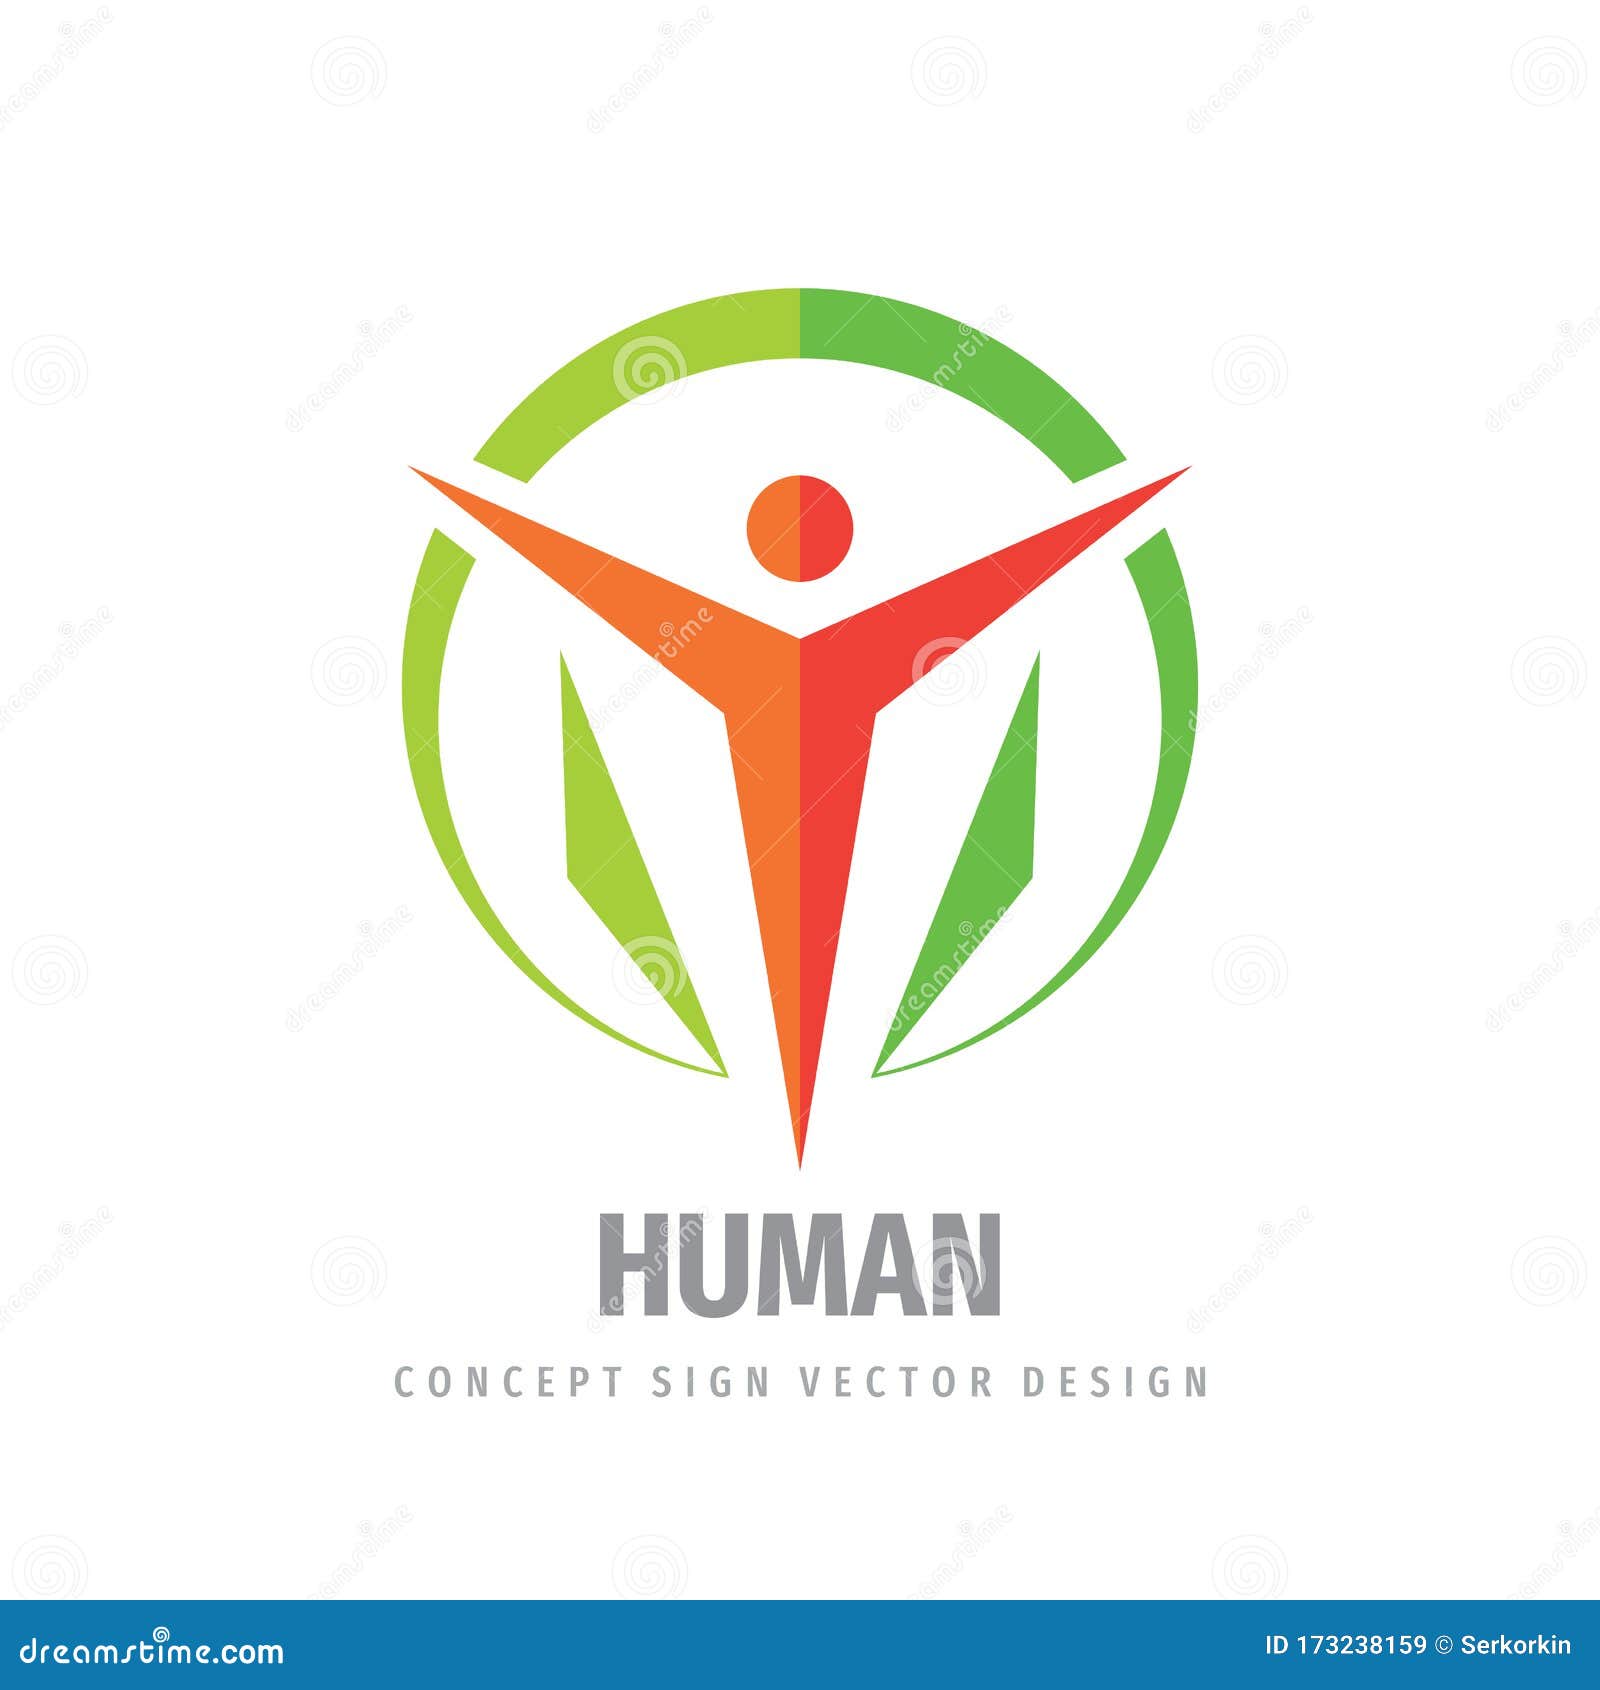 Human Logo Template Design Element. Abstract Nature Concept Healthy Wellness Symbol. Business Development Icon. Health Care Stock Vector - Illustration of identity, emblem: 173238159